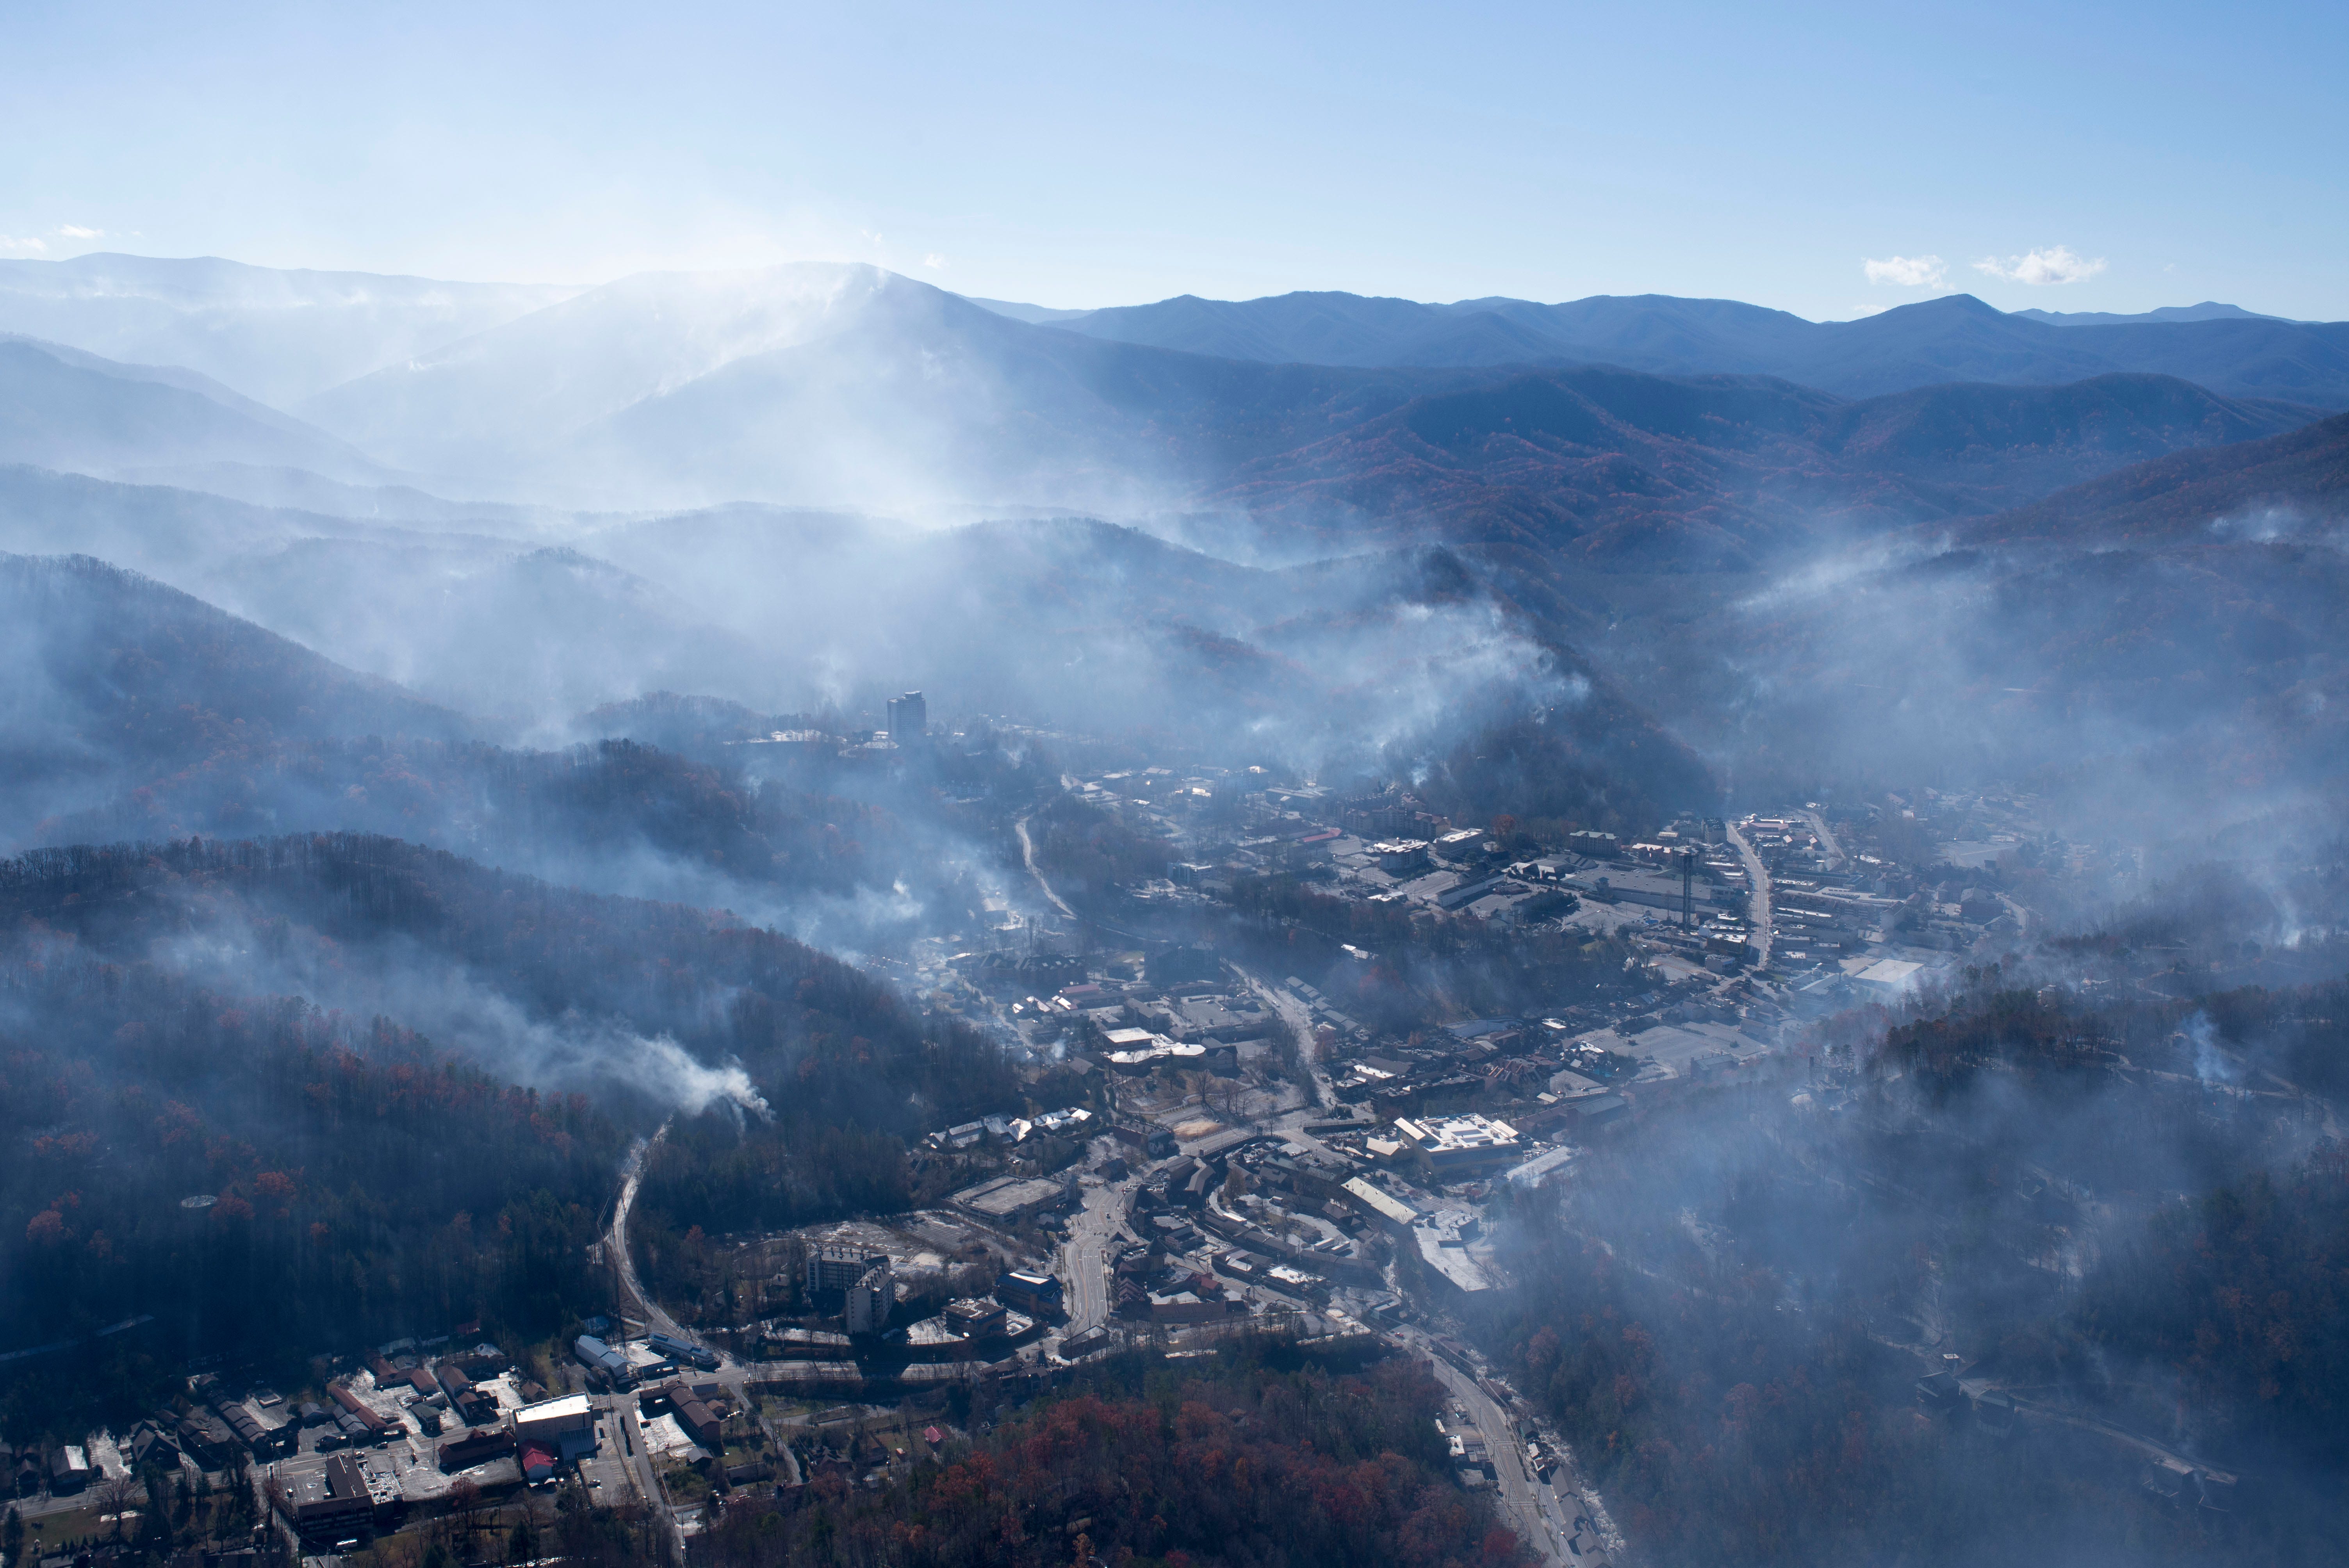 Wildfires roar through Great Smoky Mountains - Los Angeles Times